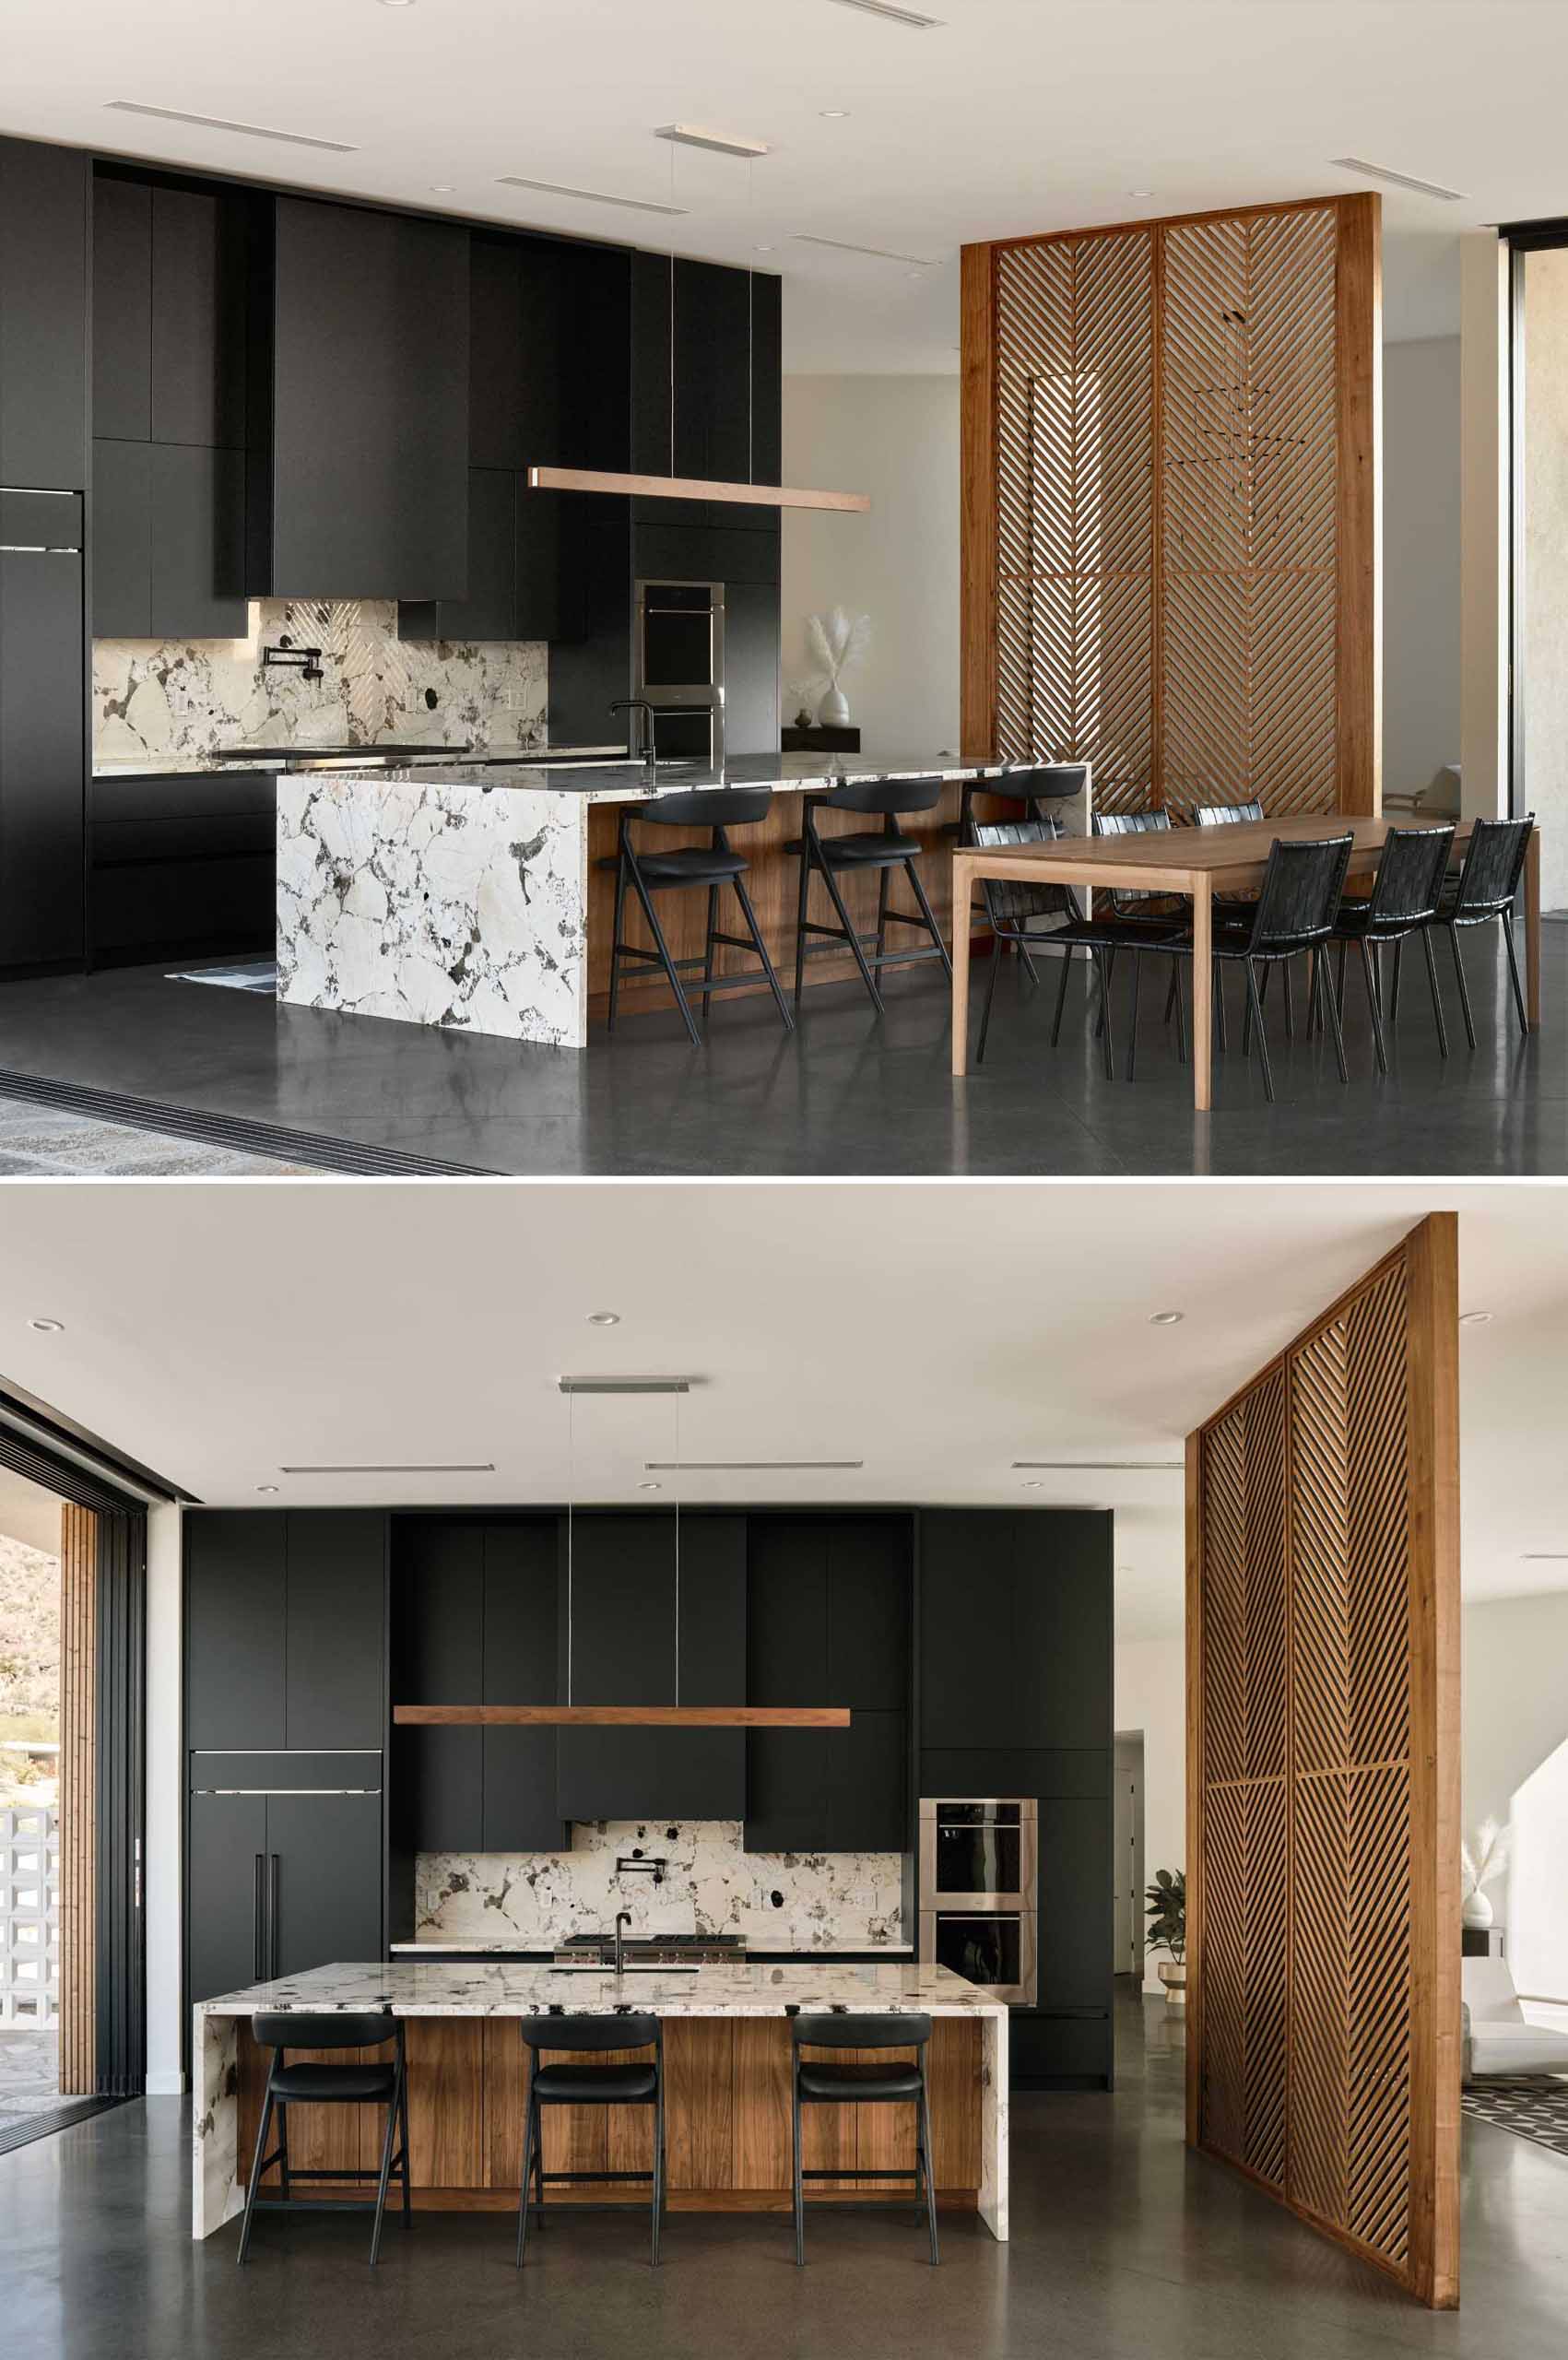 A modern kitchen with a wood partition screen with wood panels inspired by palm fronds.